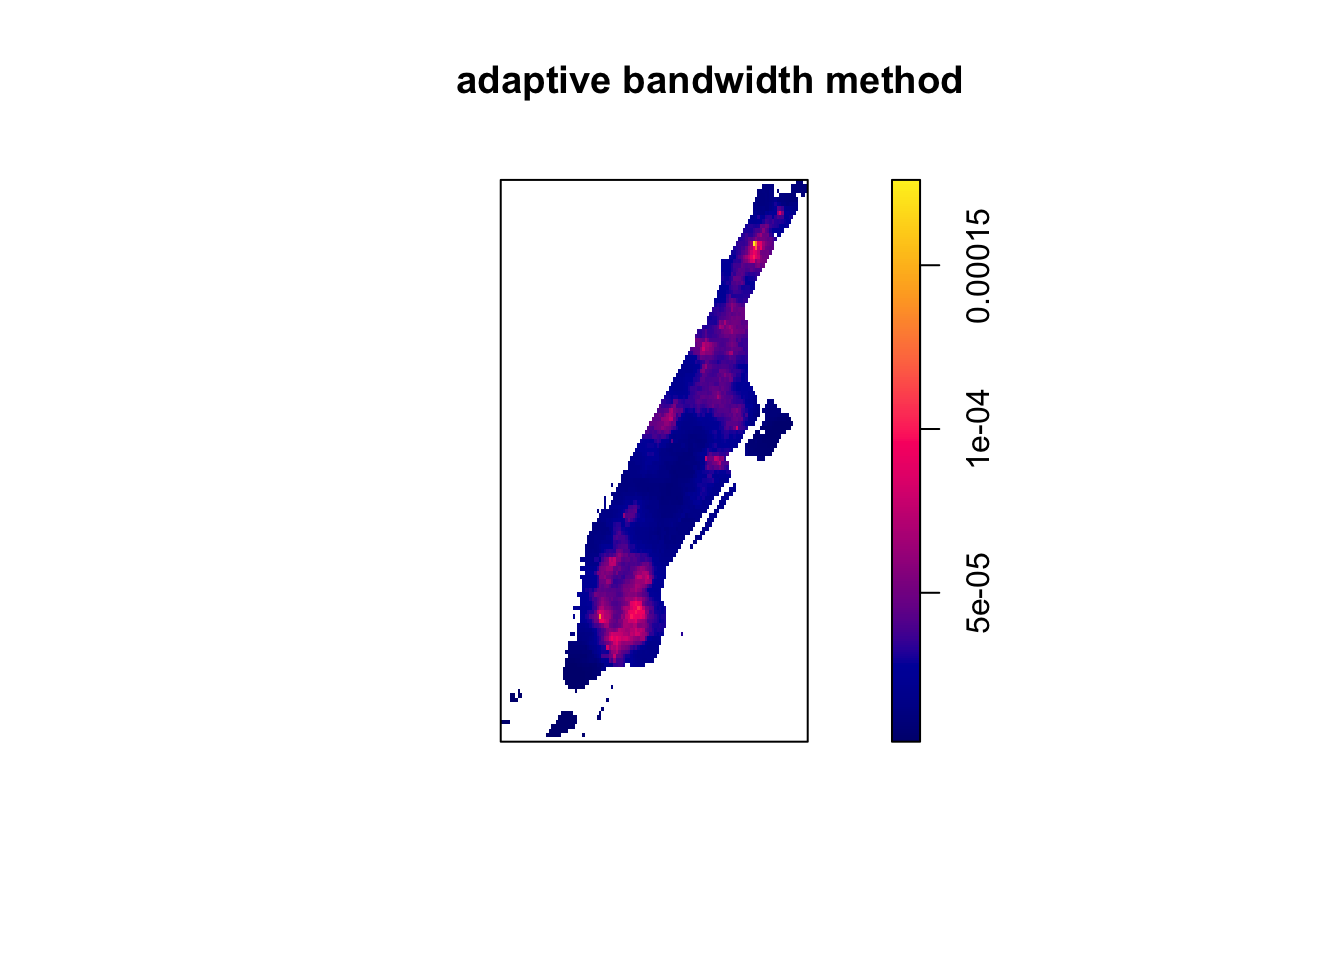 Another shading of Manhattan with a legend containing a gradient from blue to yellow, titled 'adaptive bandwitdth method'. The island is mostly blue, with smooth patches of purple and red in the south and north. Yellow appears in two of the patches.